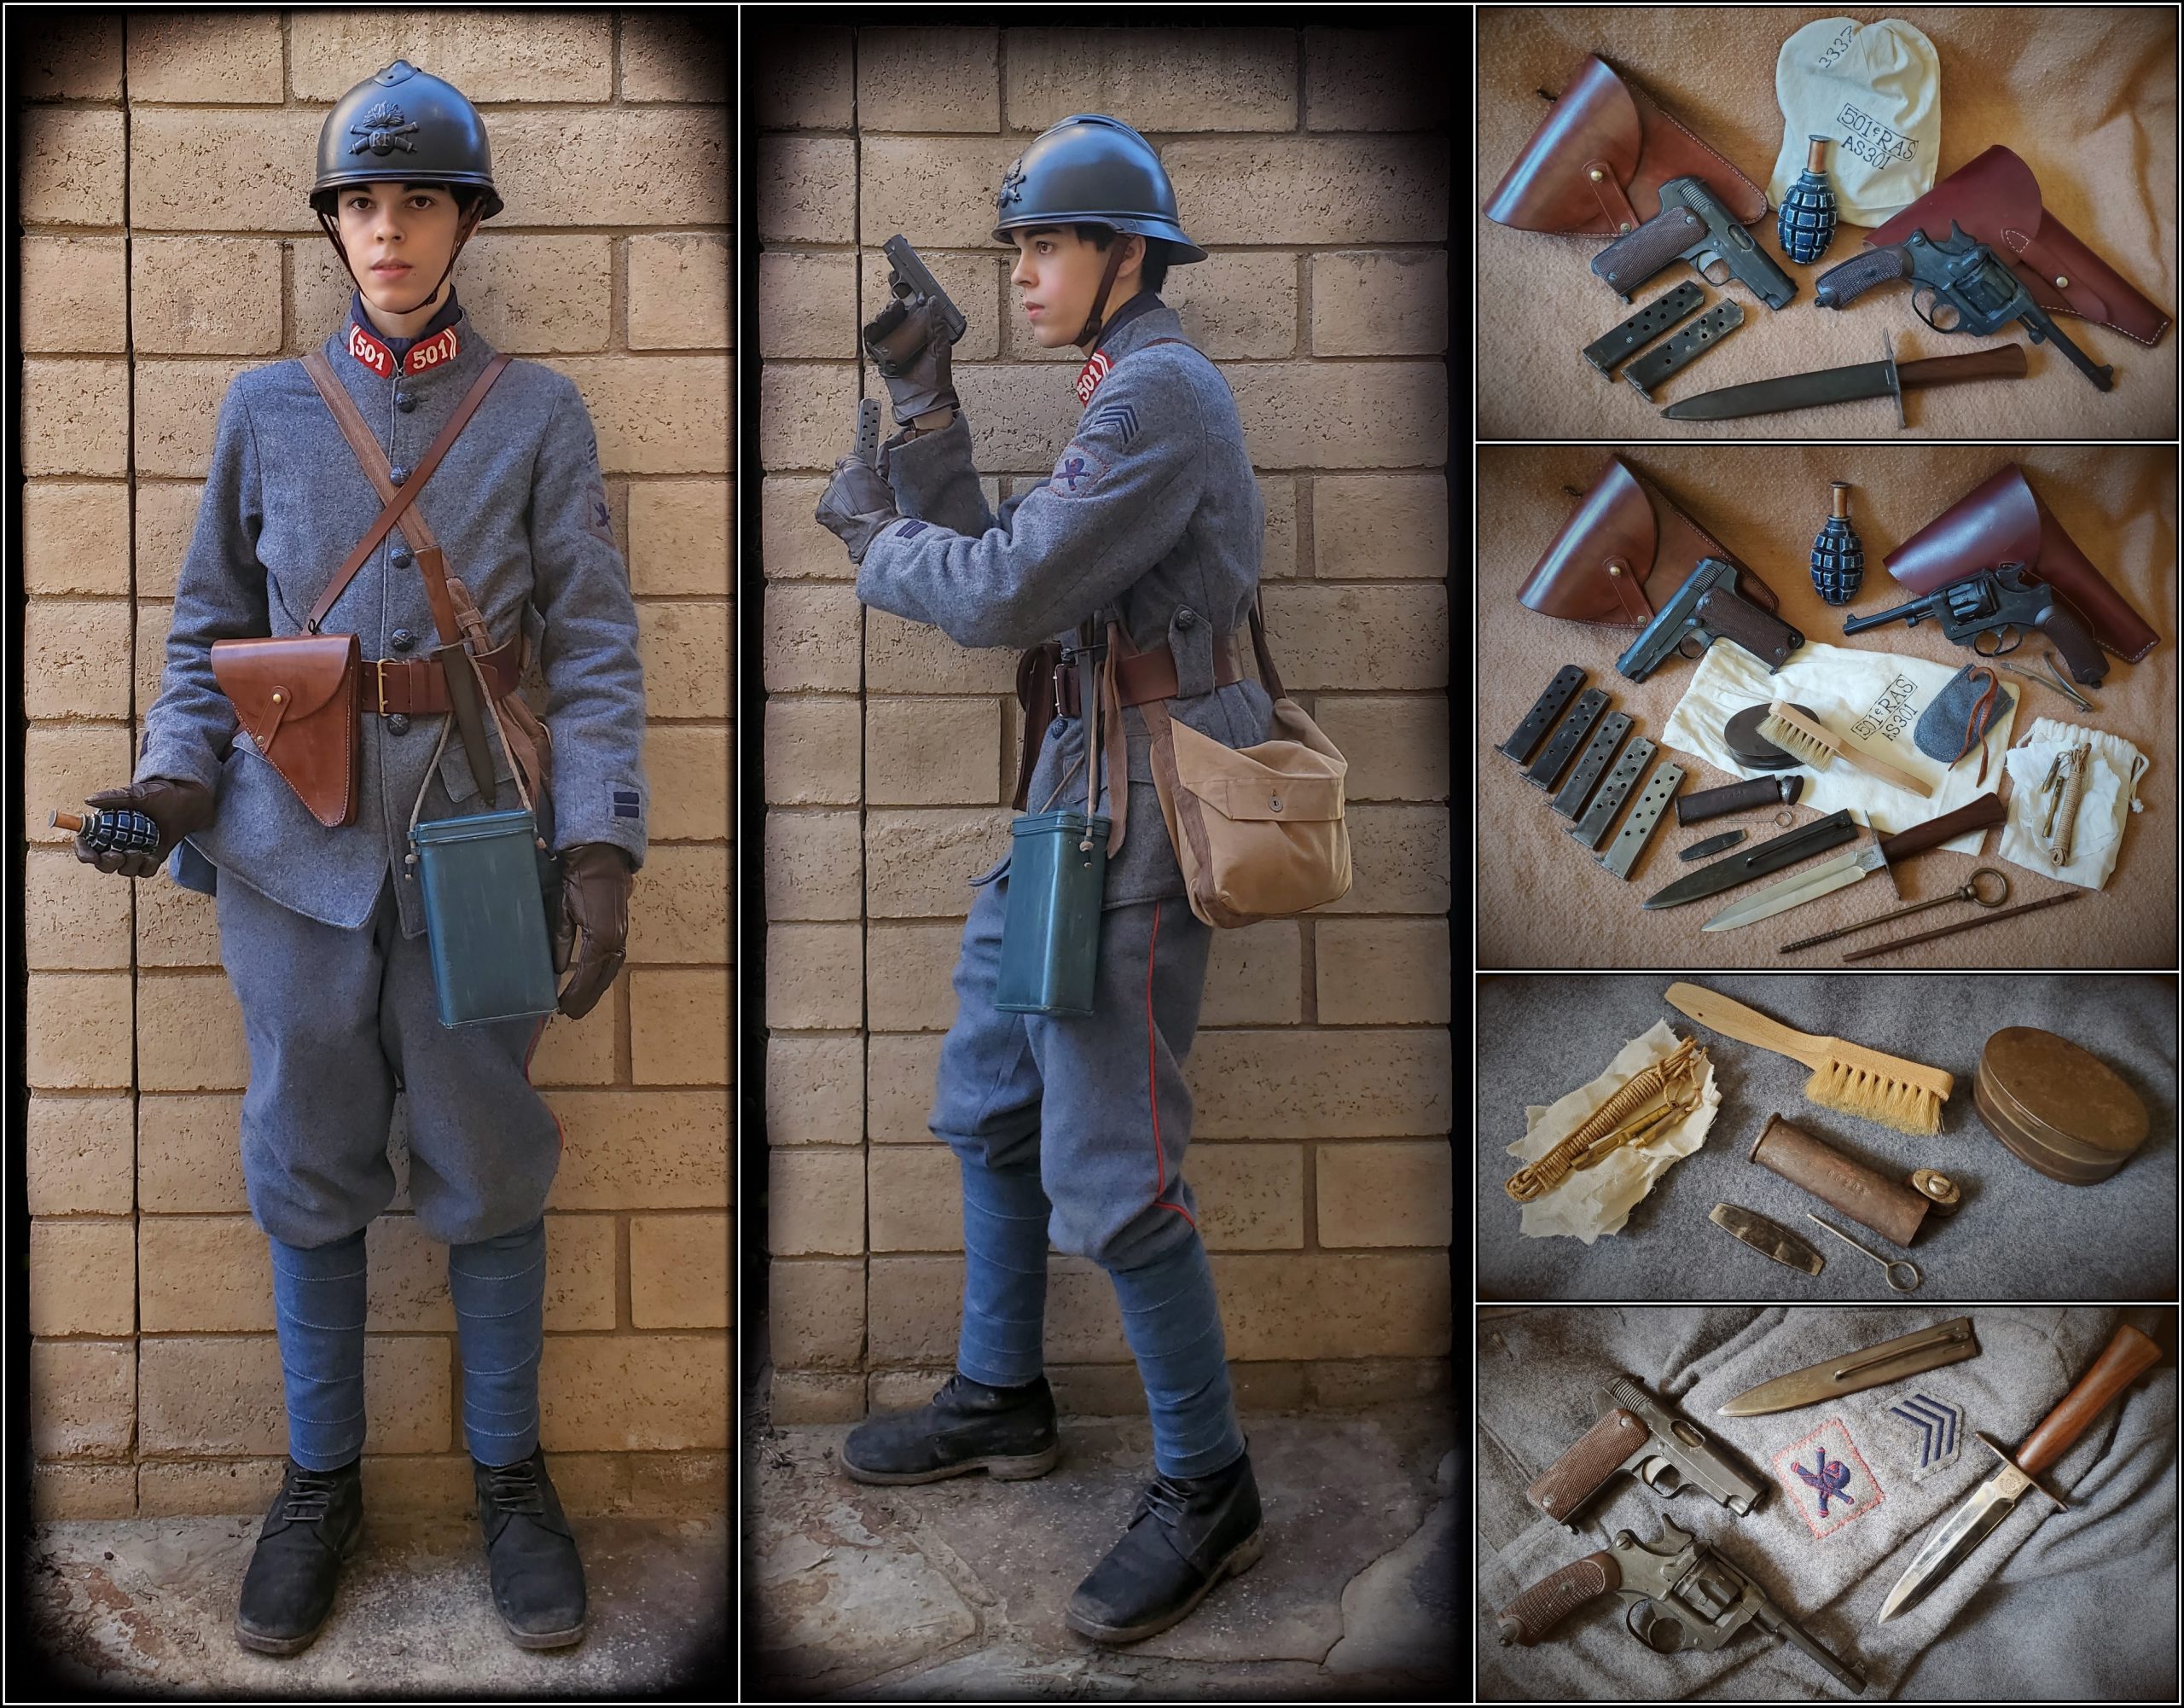 Big Battle French Tank Crewman Uniform – Total loadouts from the barracks to the battlefield!